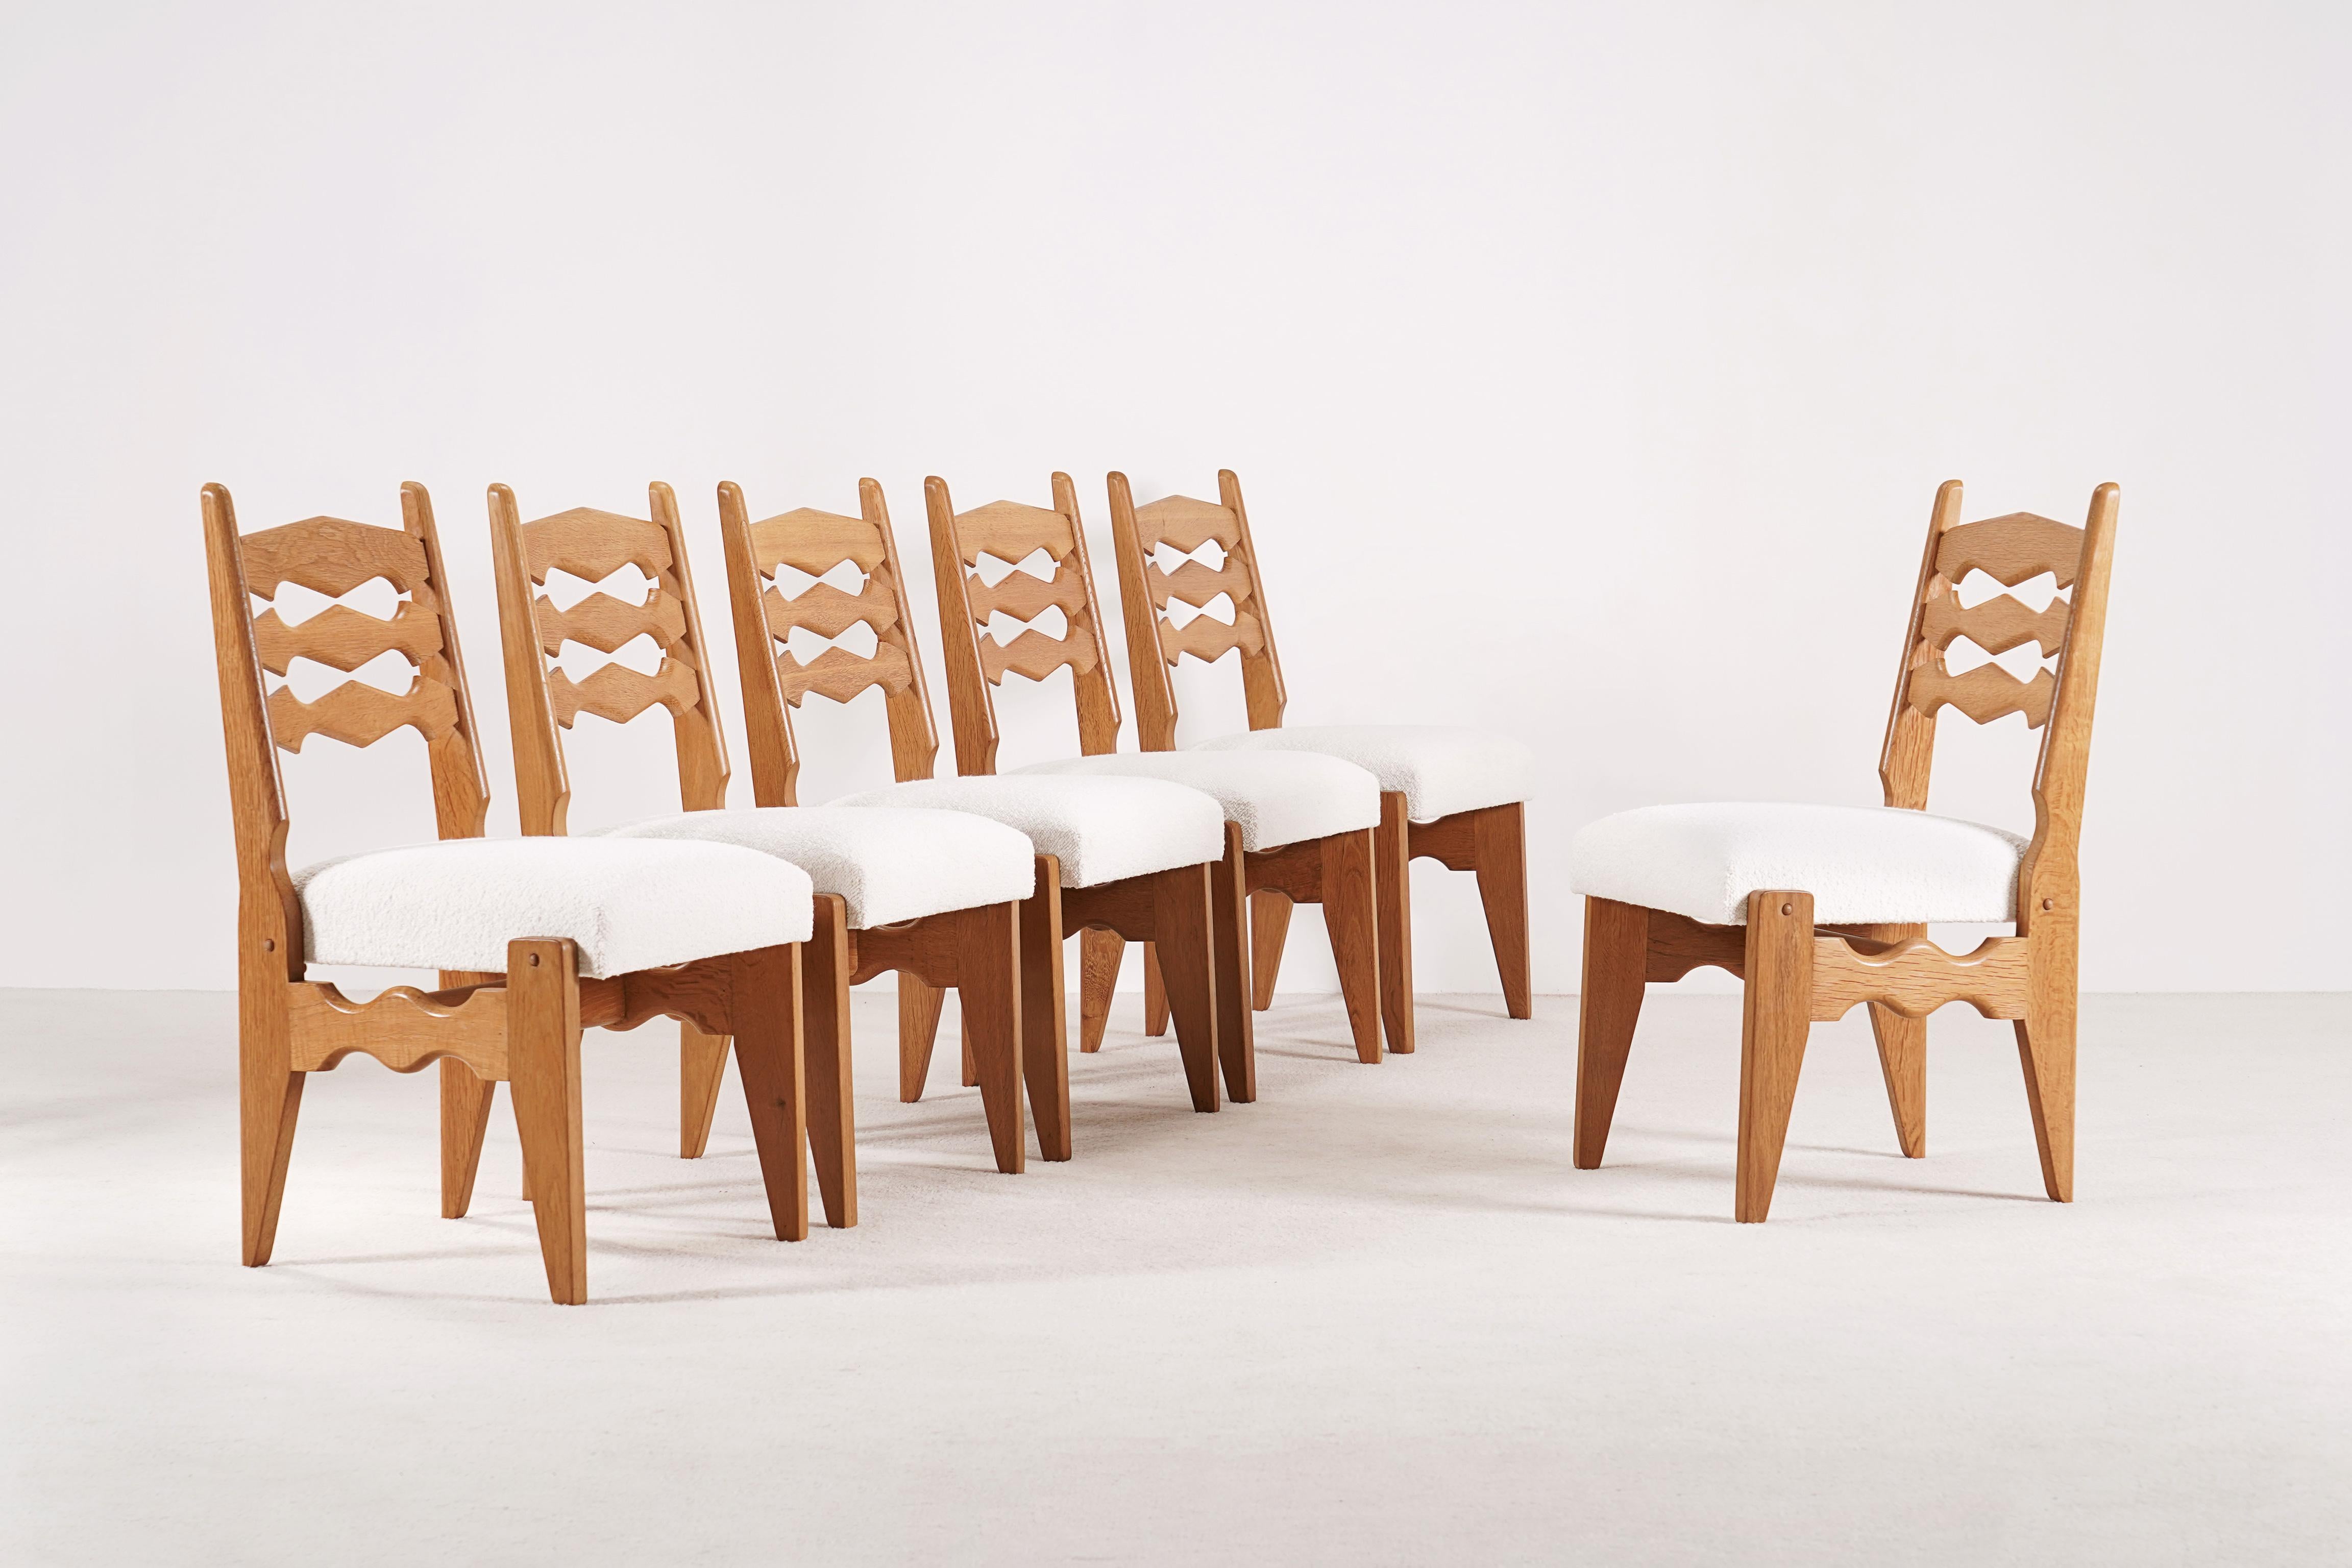 Set of 6 Dining Room Chairs in Oak designed by Guillerme et Chambron and manufactured by the French company 